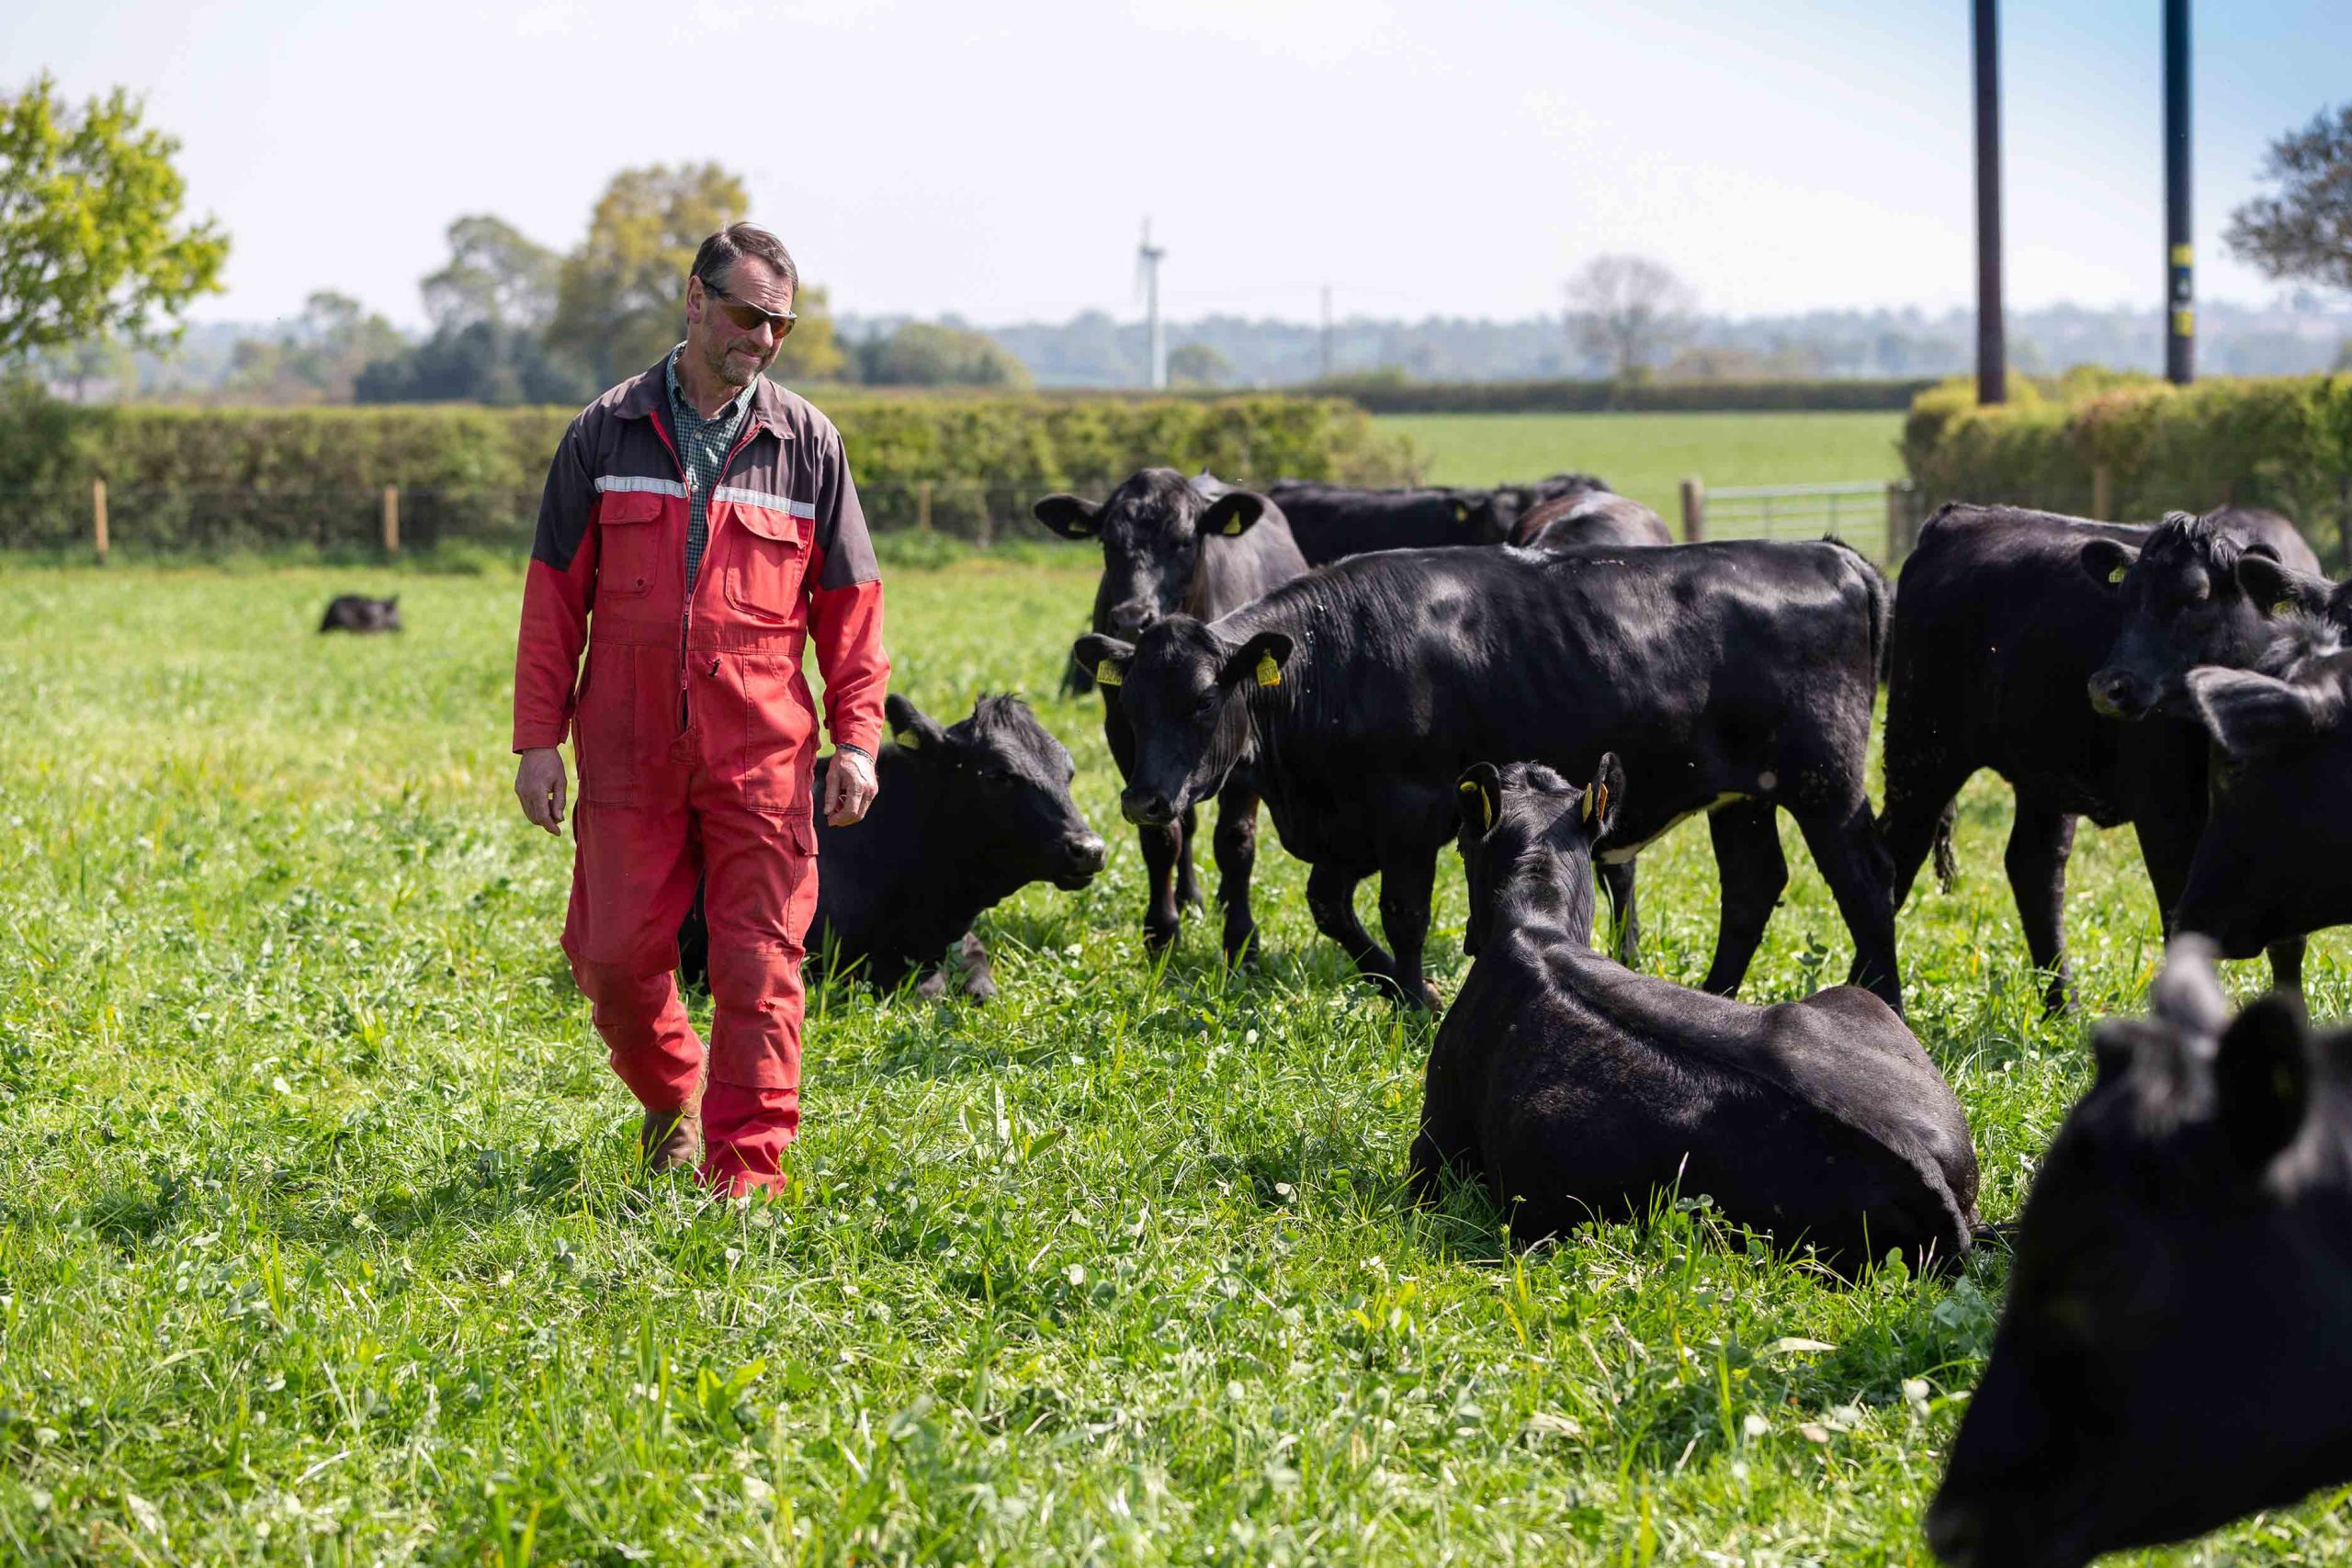 Herbal leys transform beef production for Julian Bowers